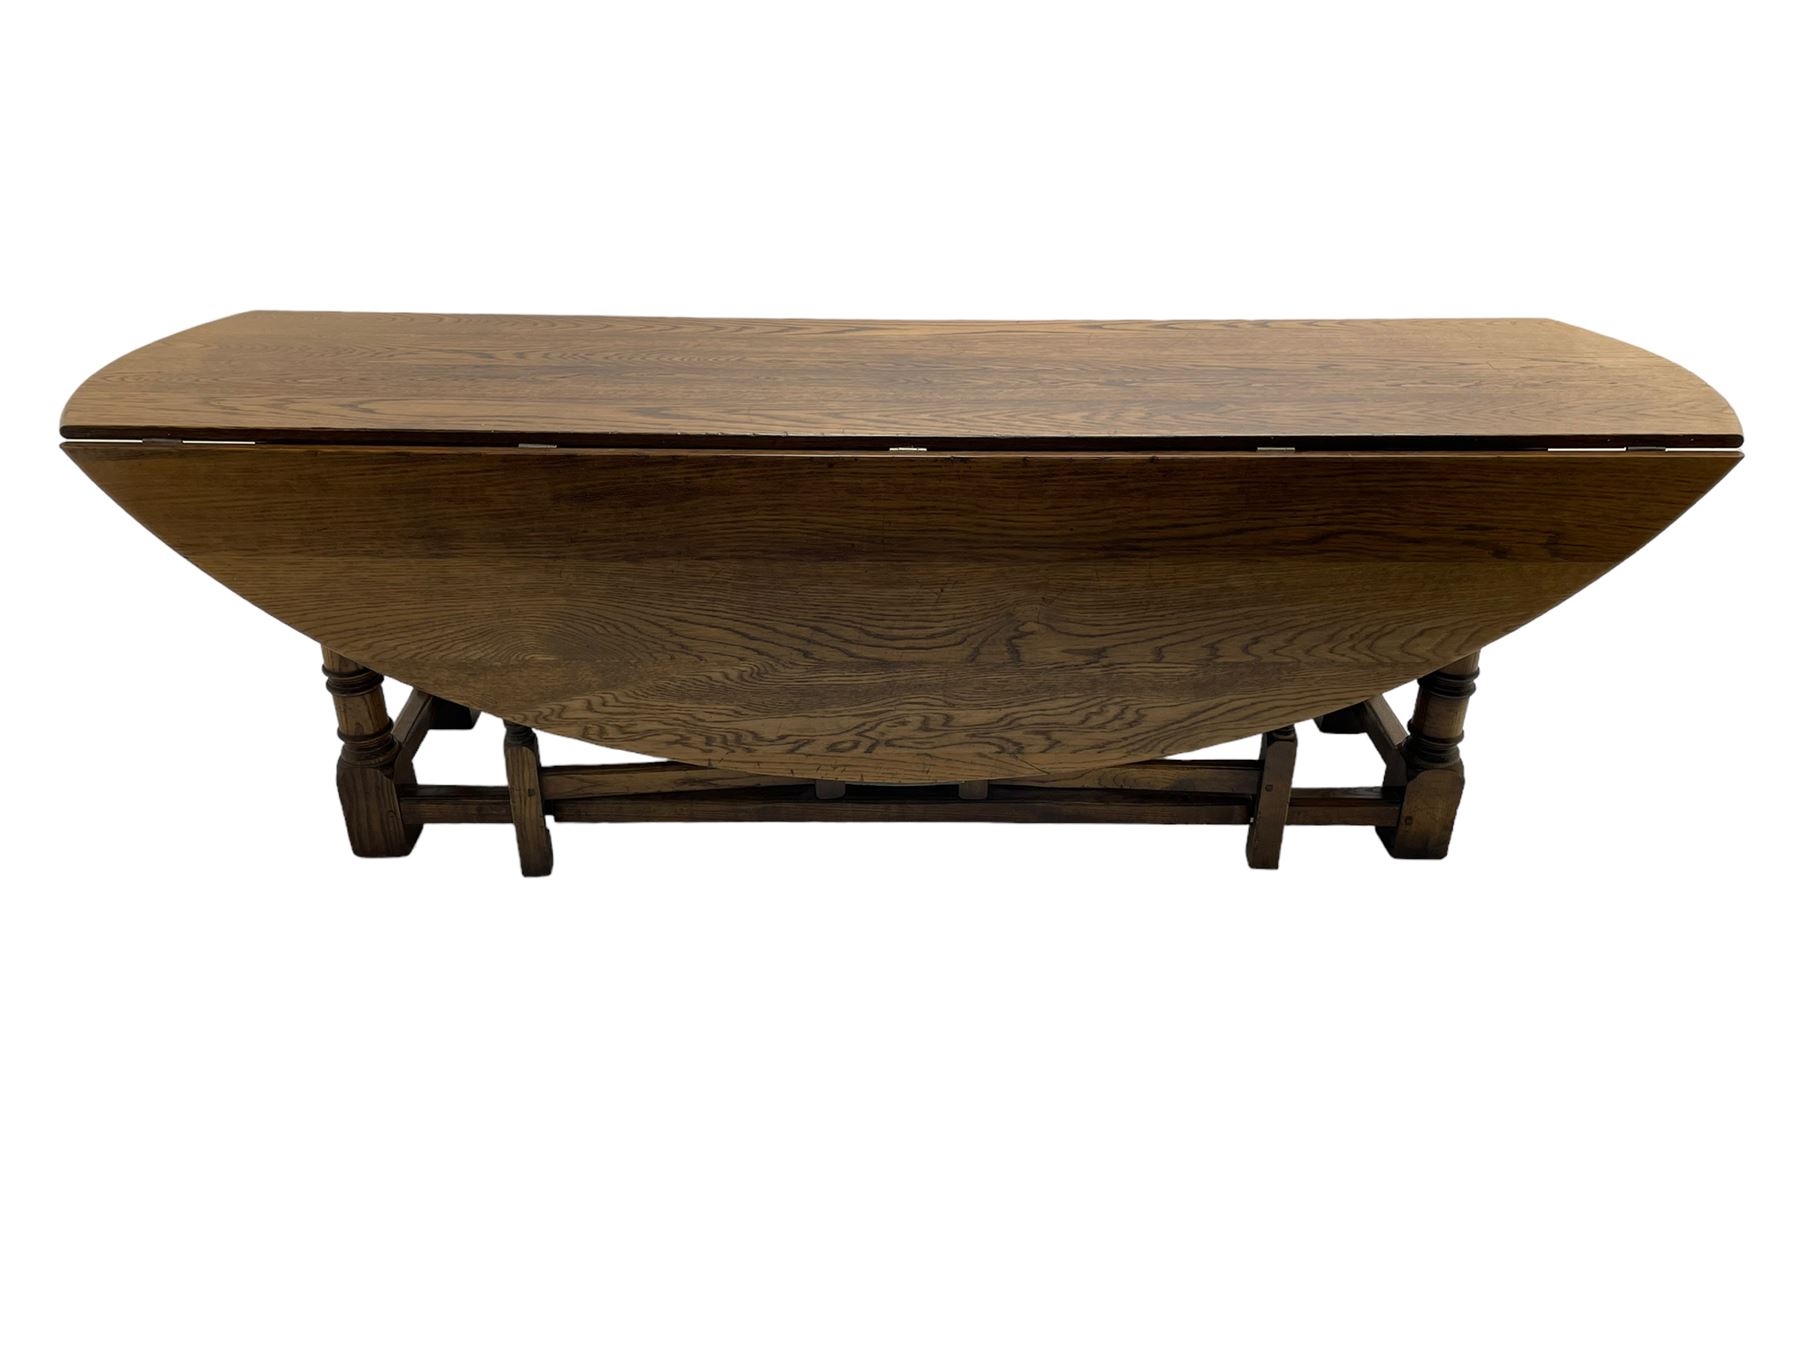 Large 18th century design oak wake or dining table - Image 9 of 12